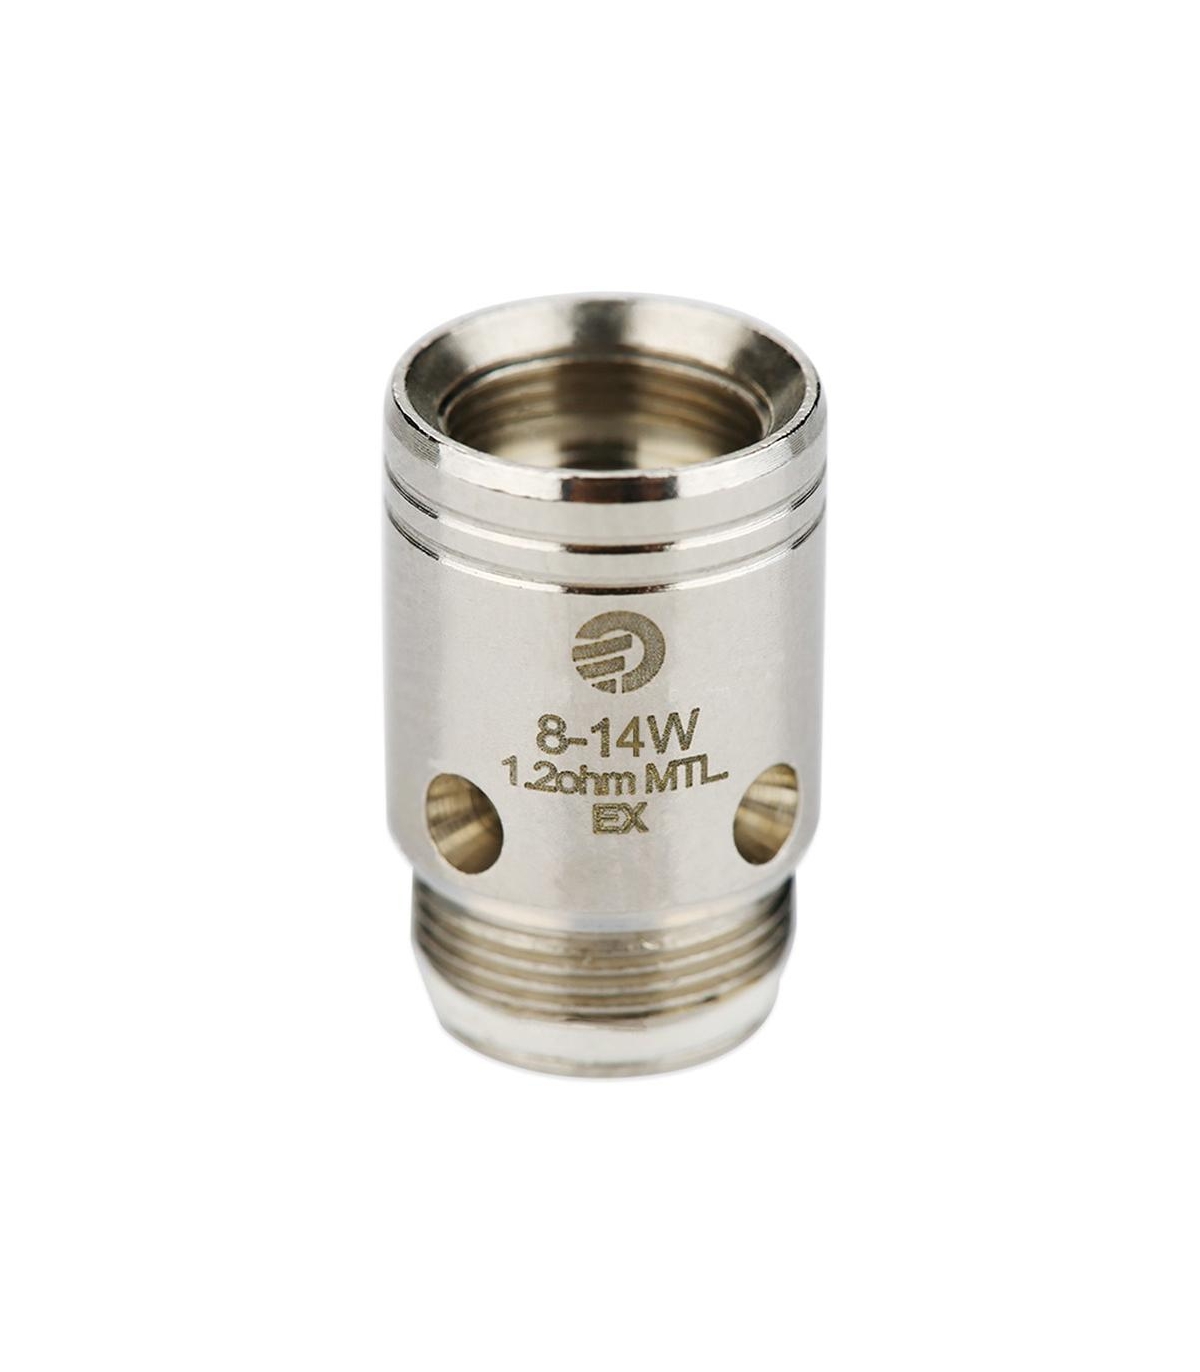 Joyetech EX Exceed Coil 1.2ohm Coil